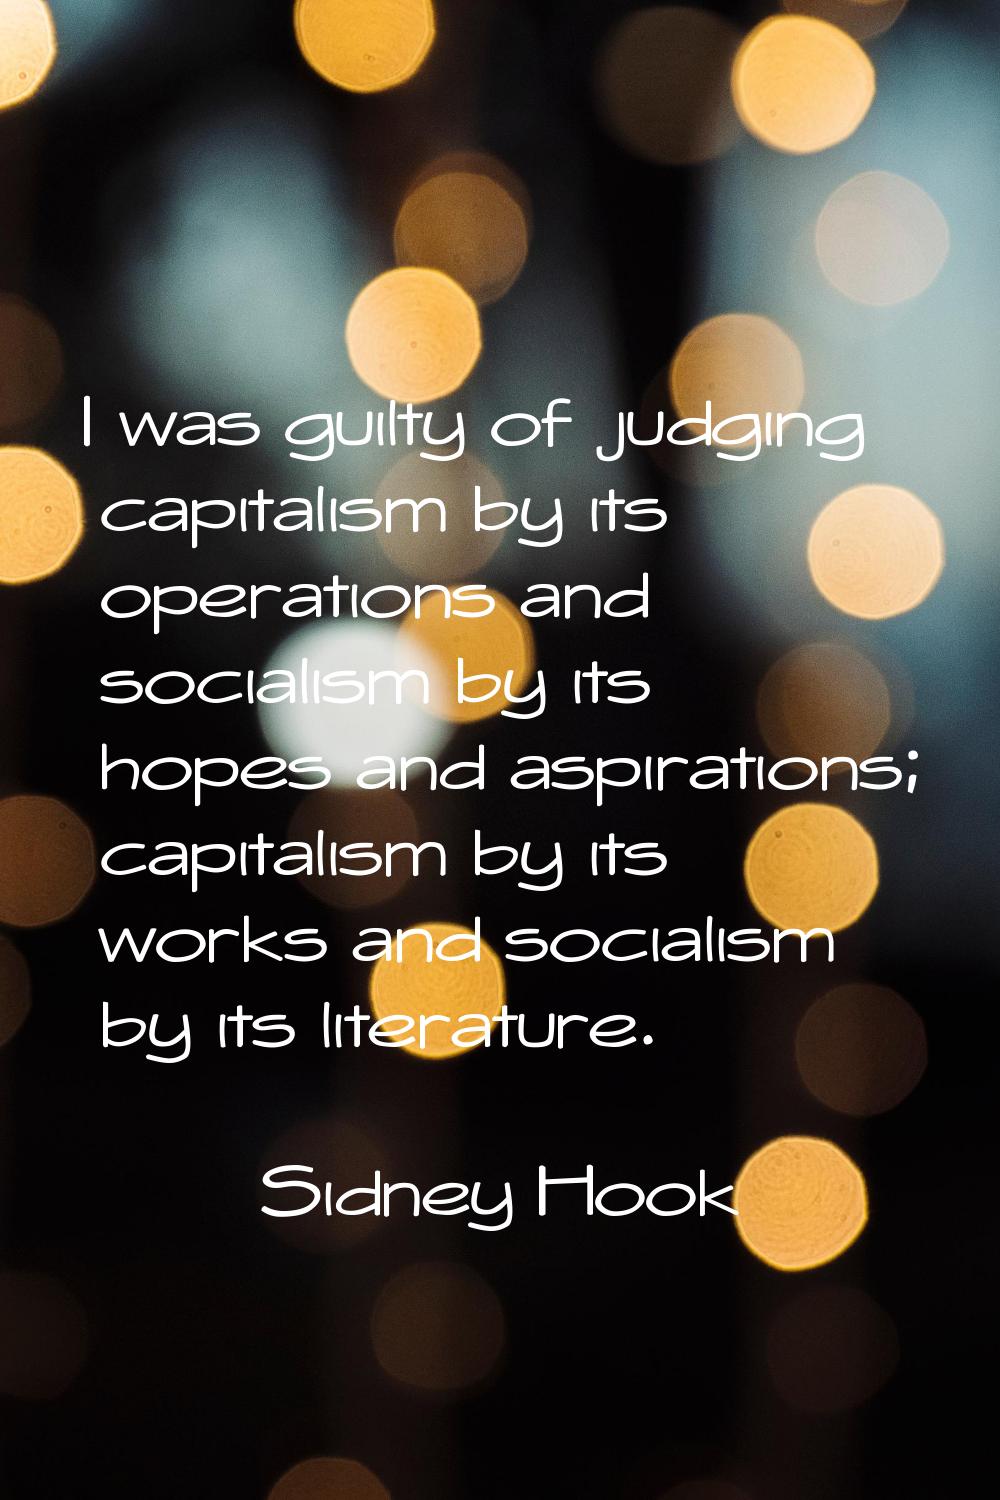 I was guilty of judging capitalism by its operations and socialism by its hopes and aspirations; ca